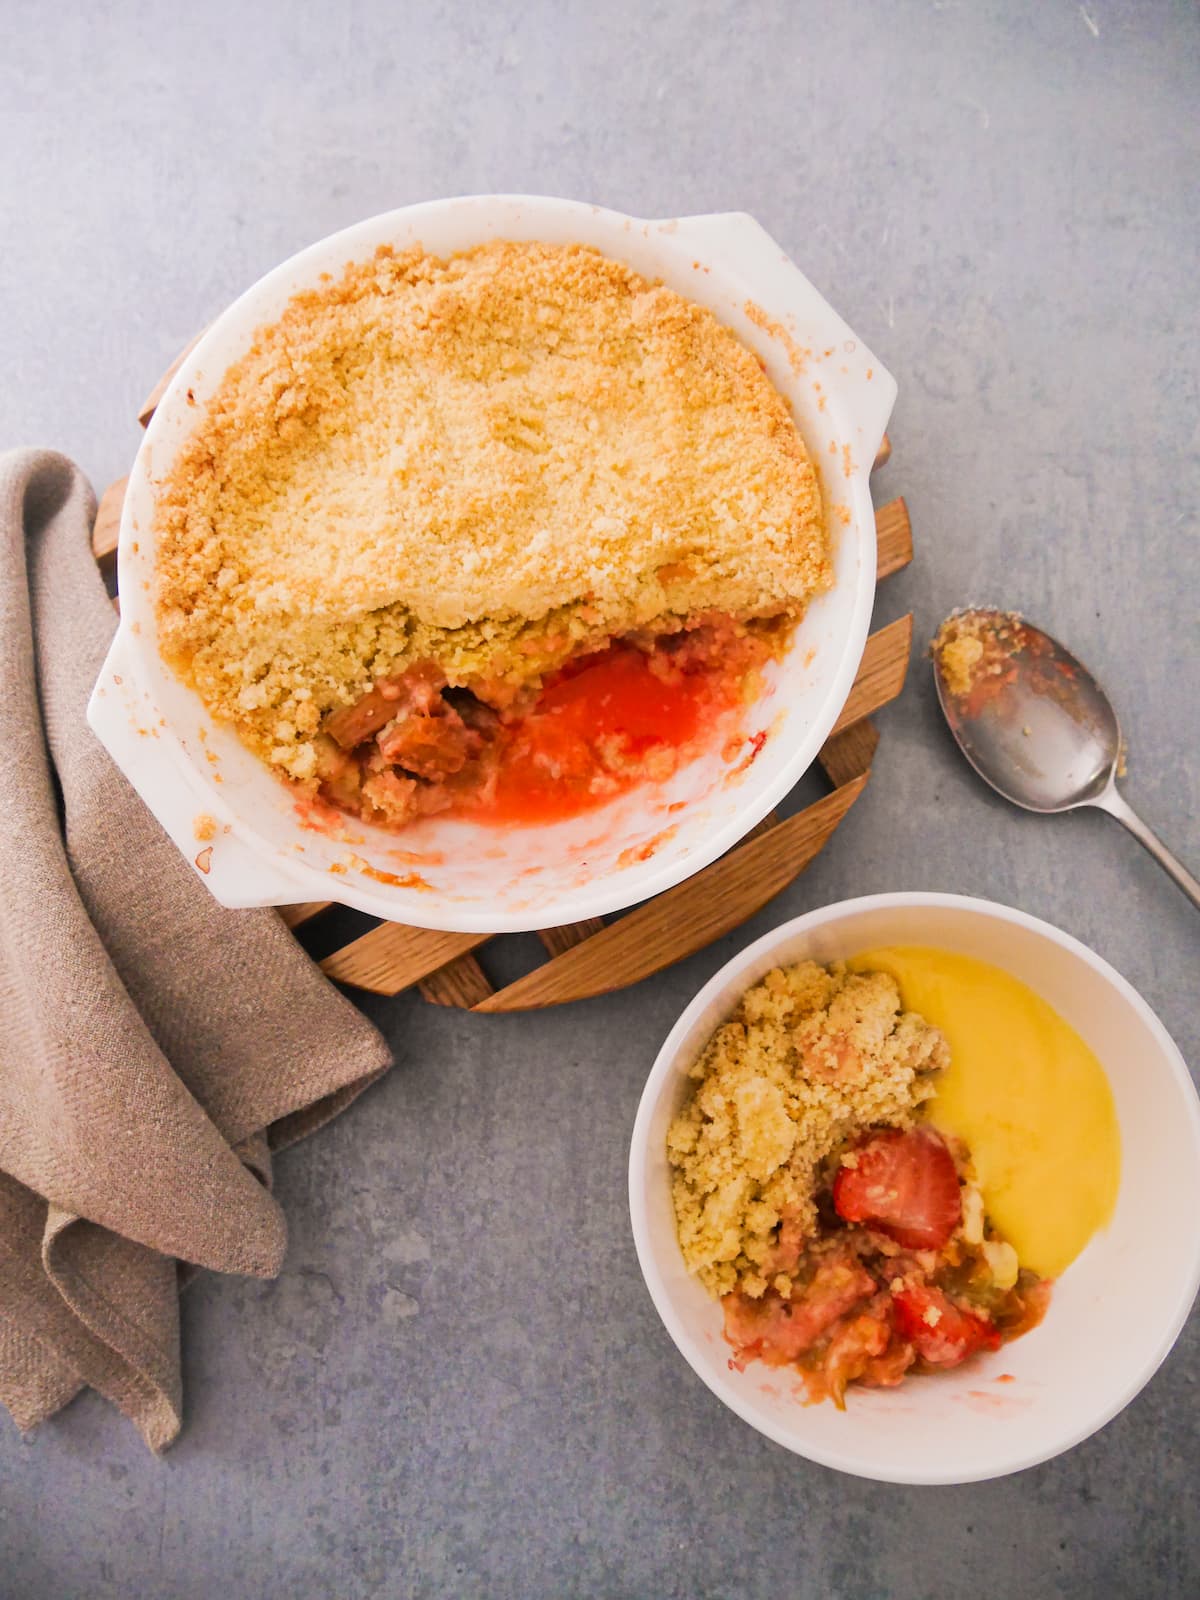 White pyrex dish filled with rhubarb and strawberry crumble, set on a wooden board, with a while bowl of crumble and custard set alongside.